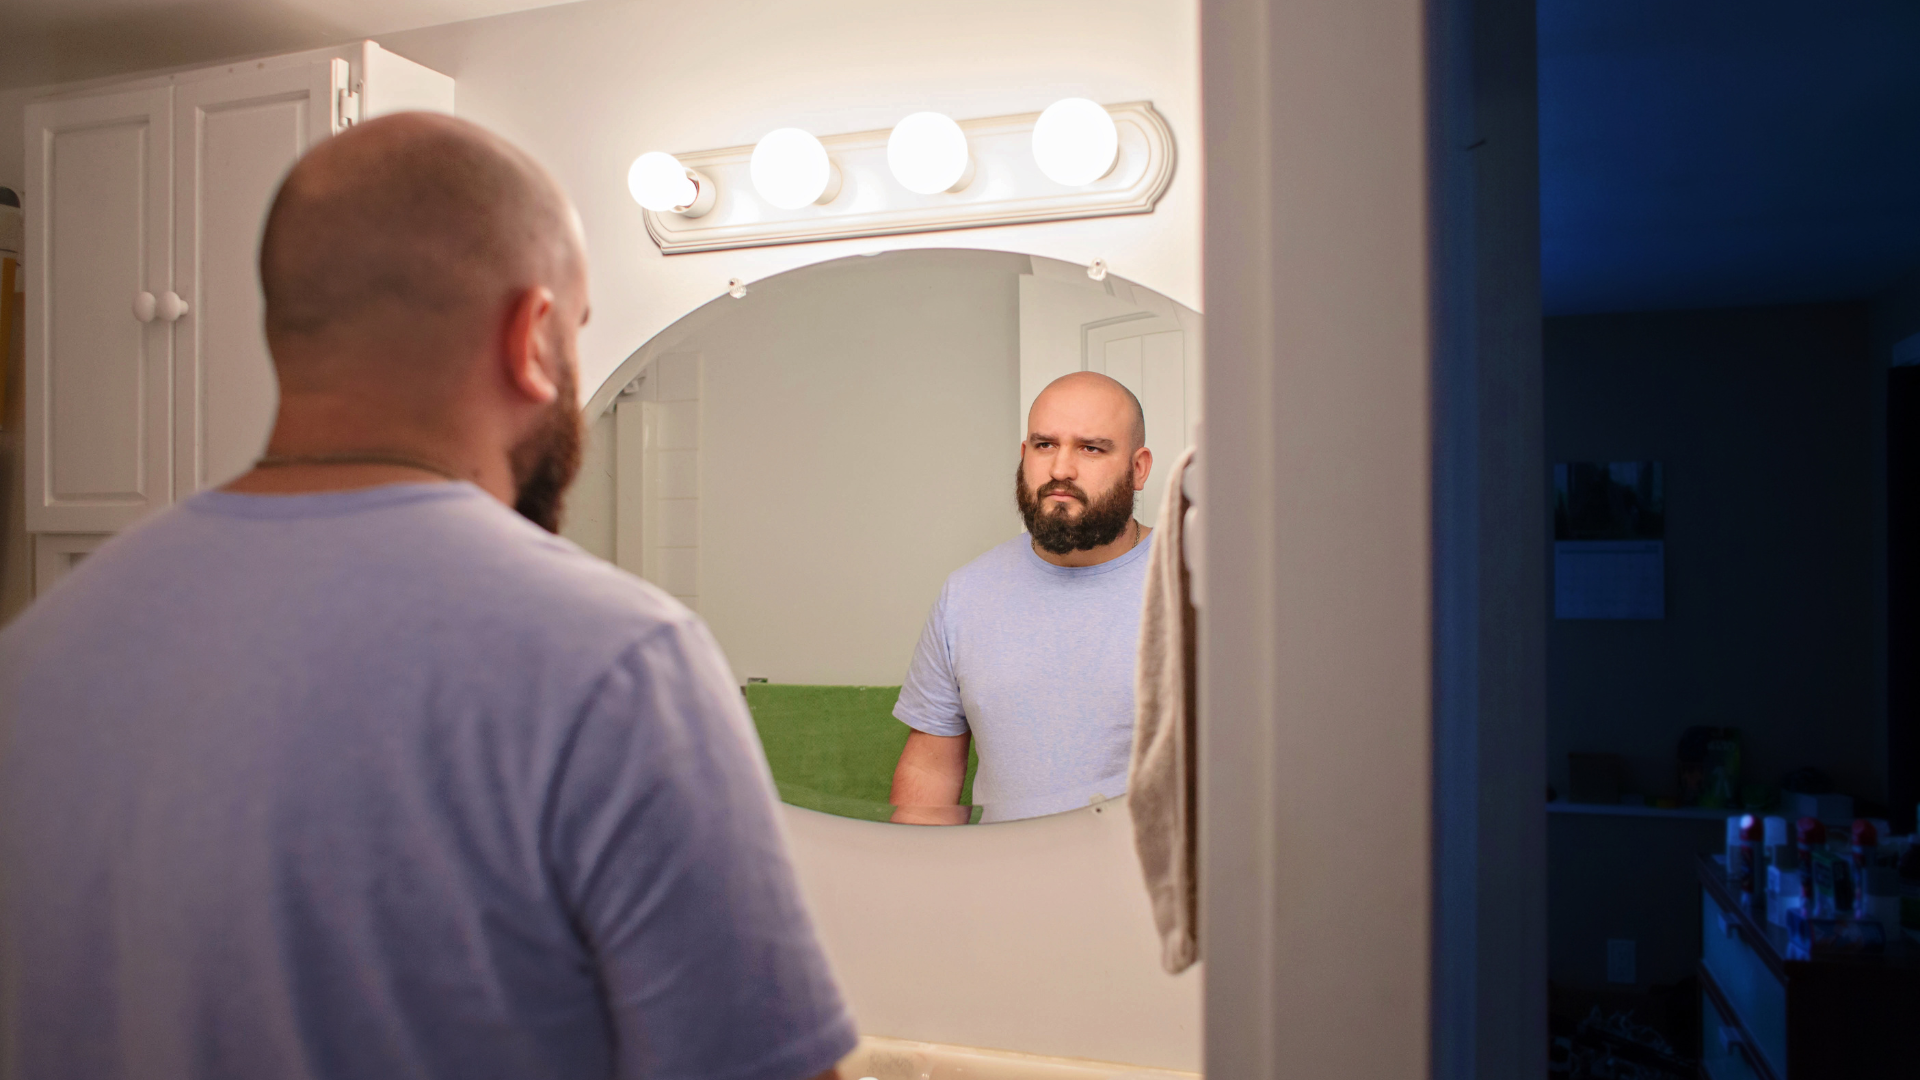 A man looking in the mirror reflects on his own self image.